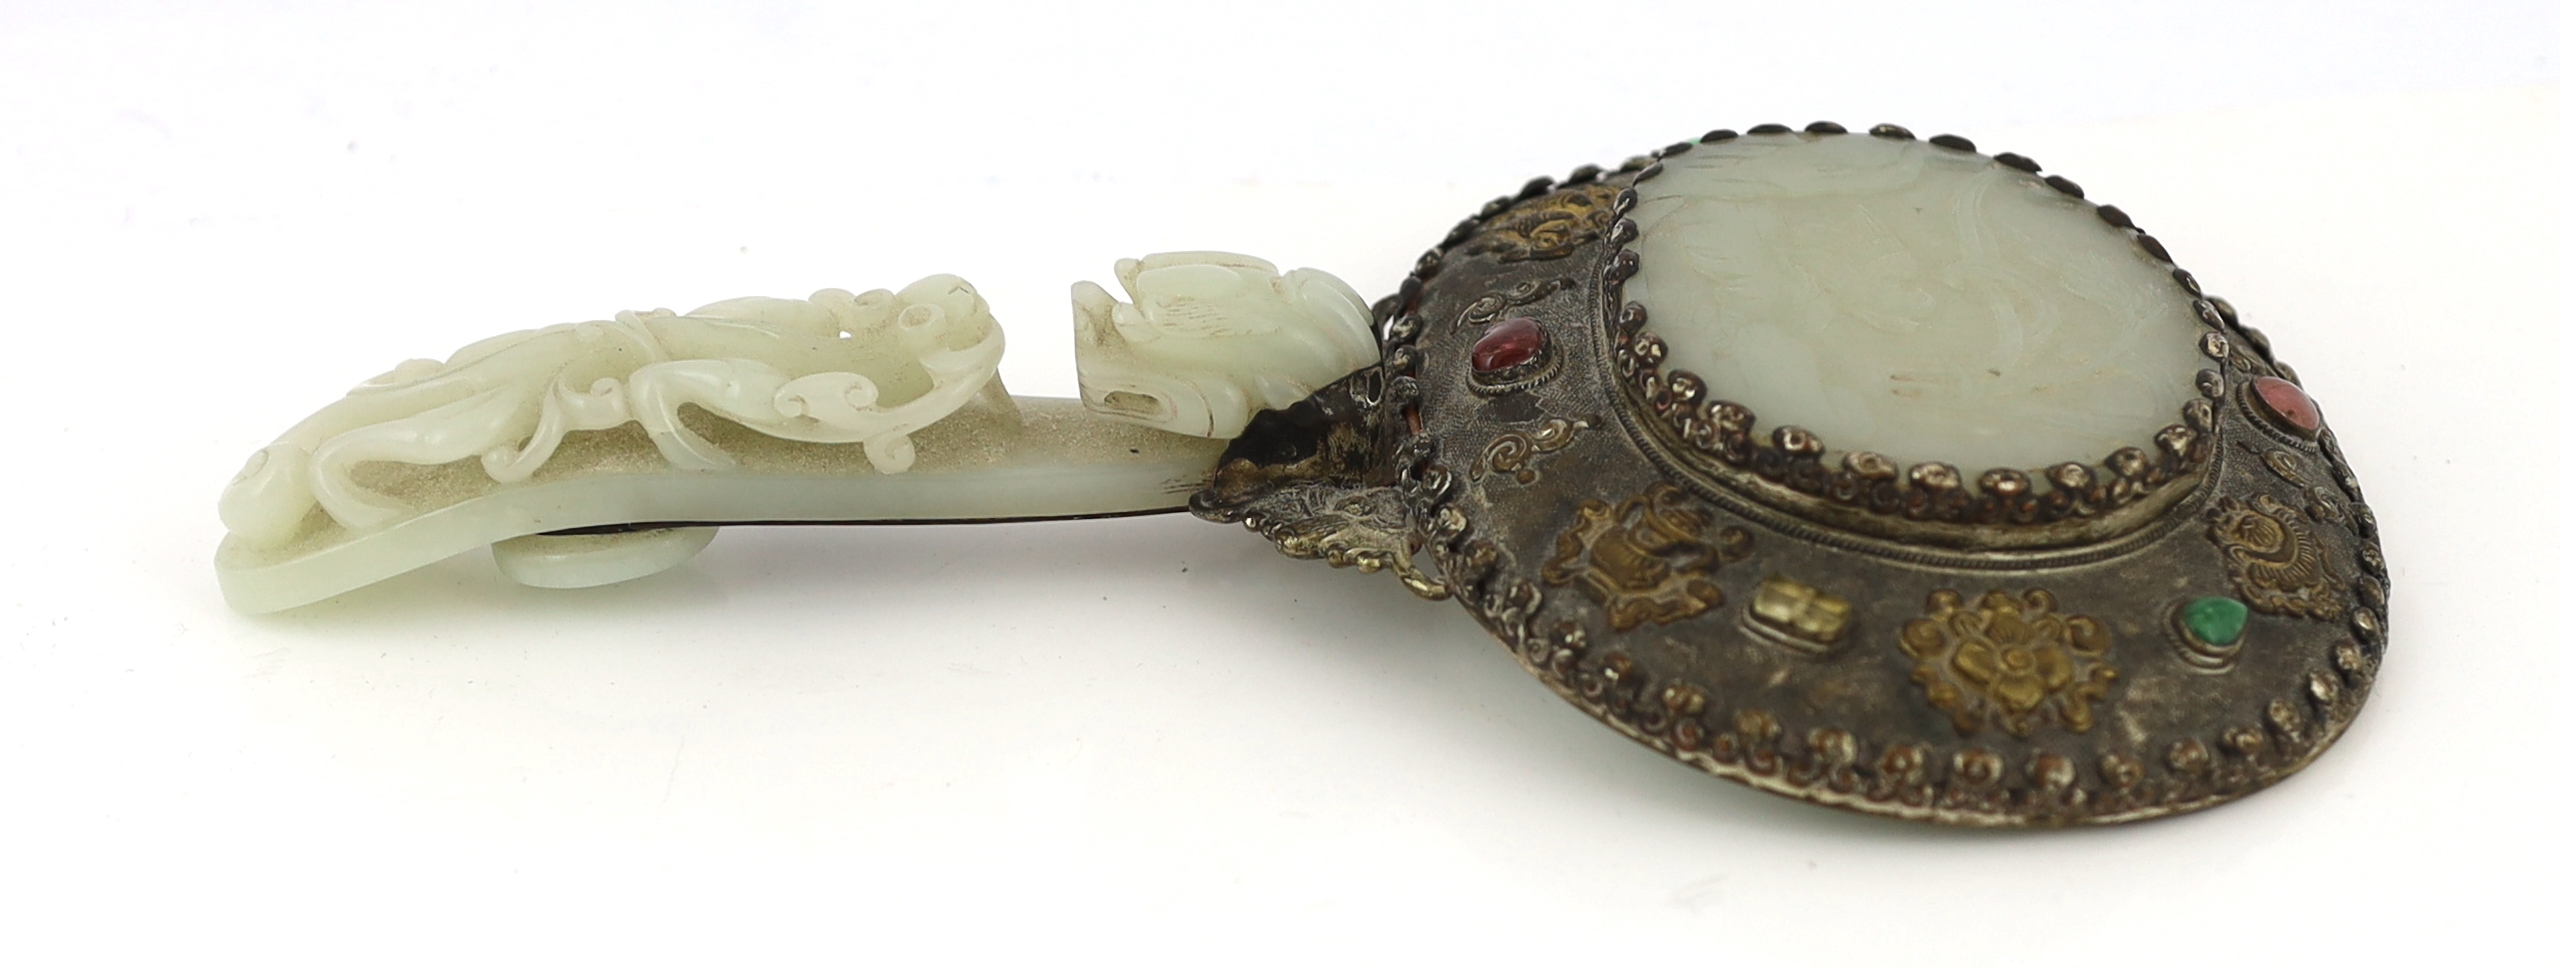 A Chinese celadon jade mounted hand mirror, the jade 18th/19th century